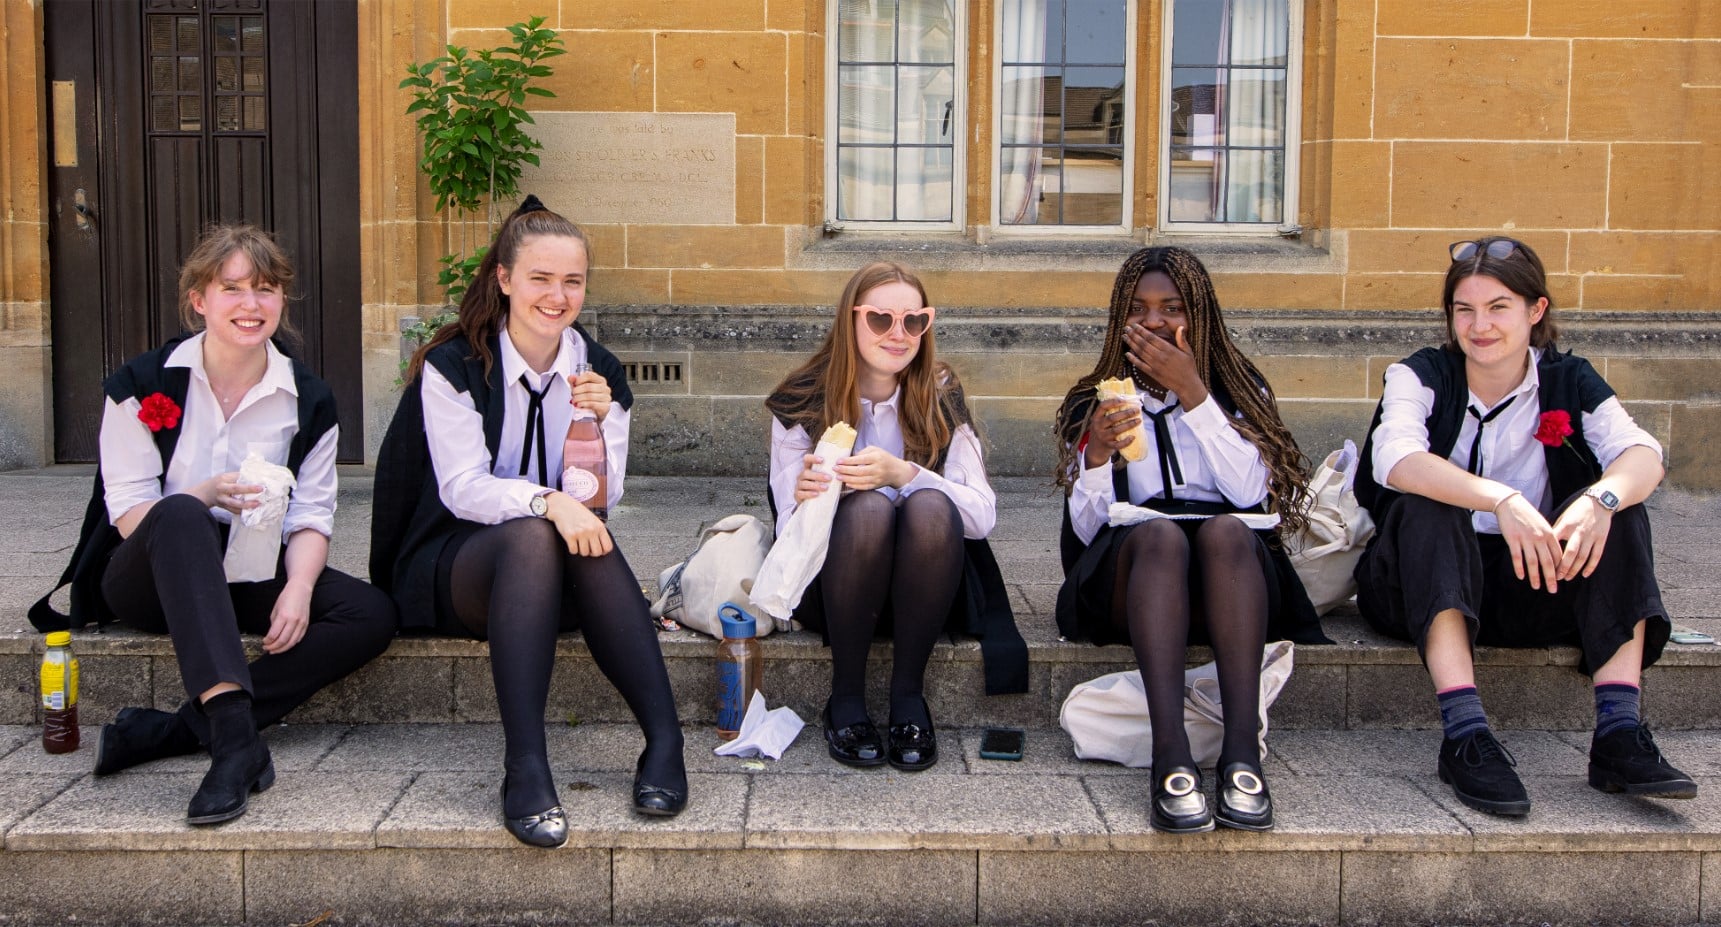 5 female students in their academic gowns sat on steps outside with each having a drink or sandwich in hand